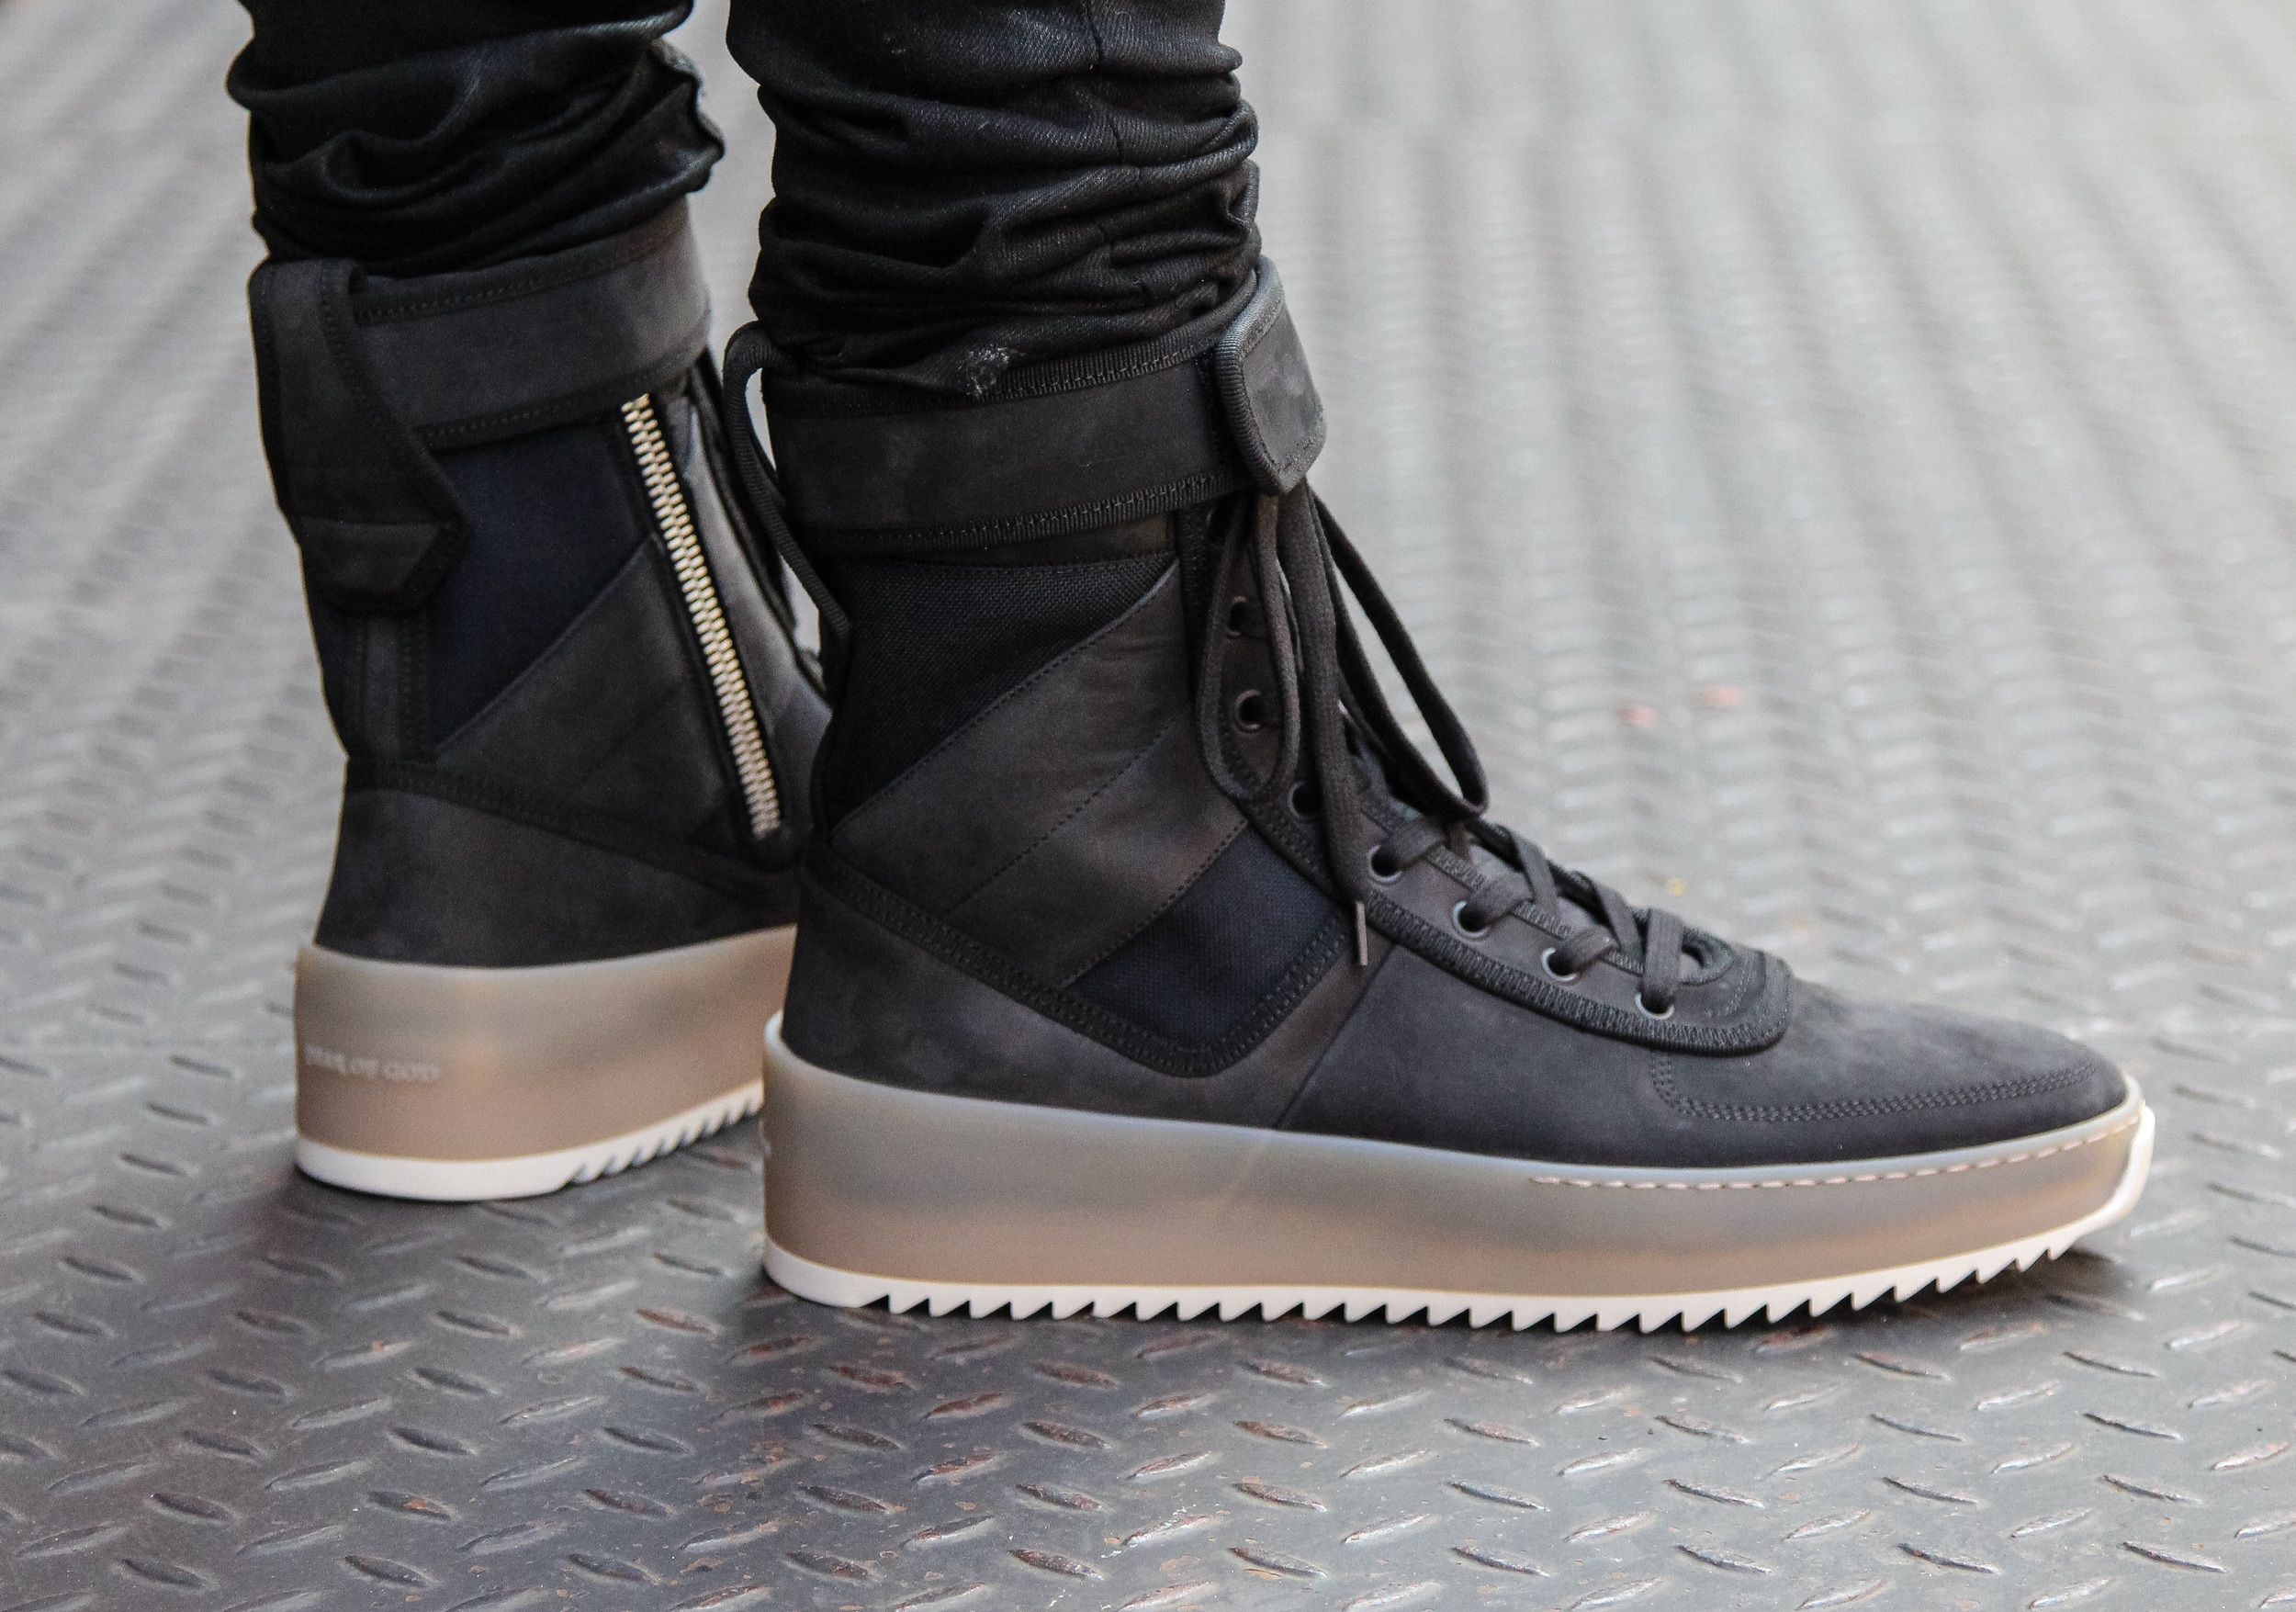 fear of god sneakers price